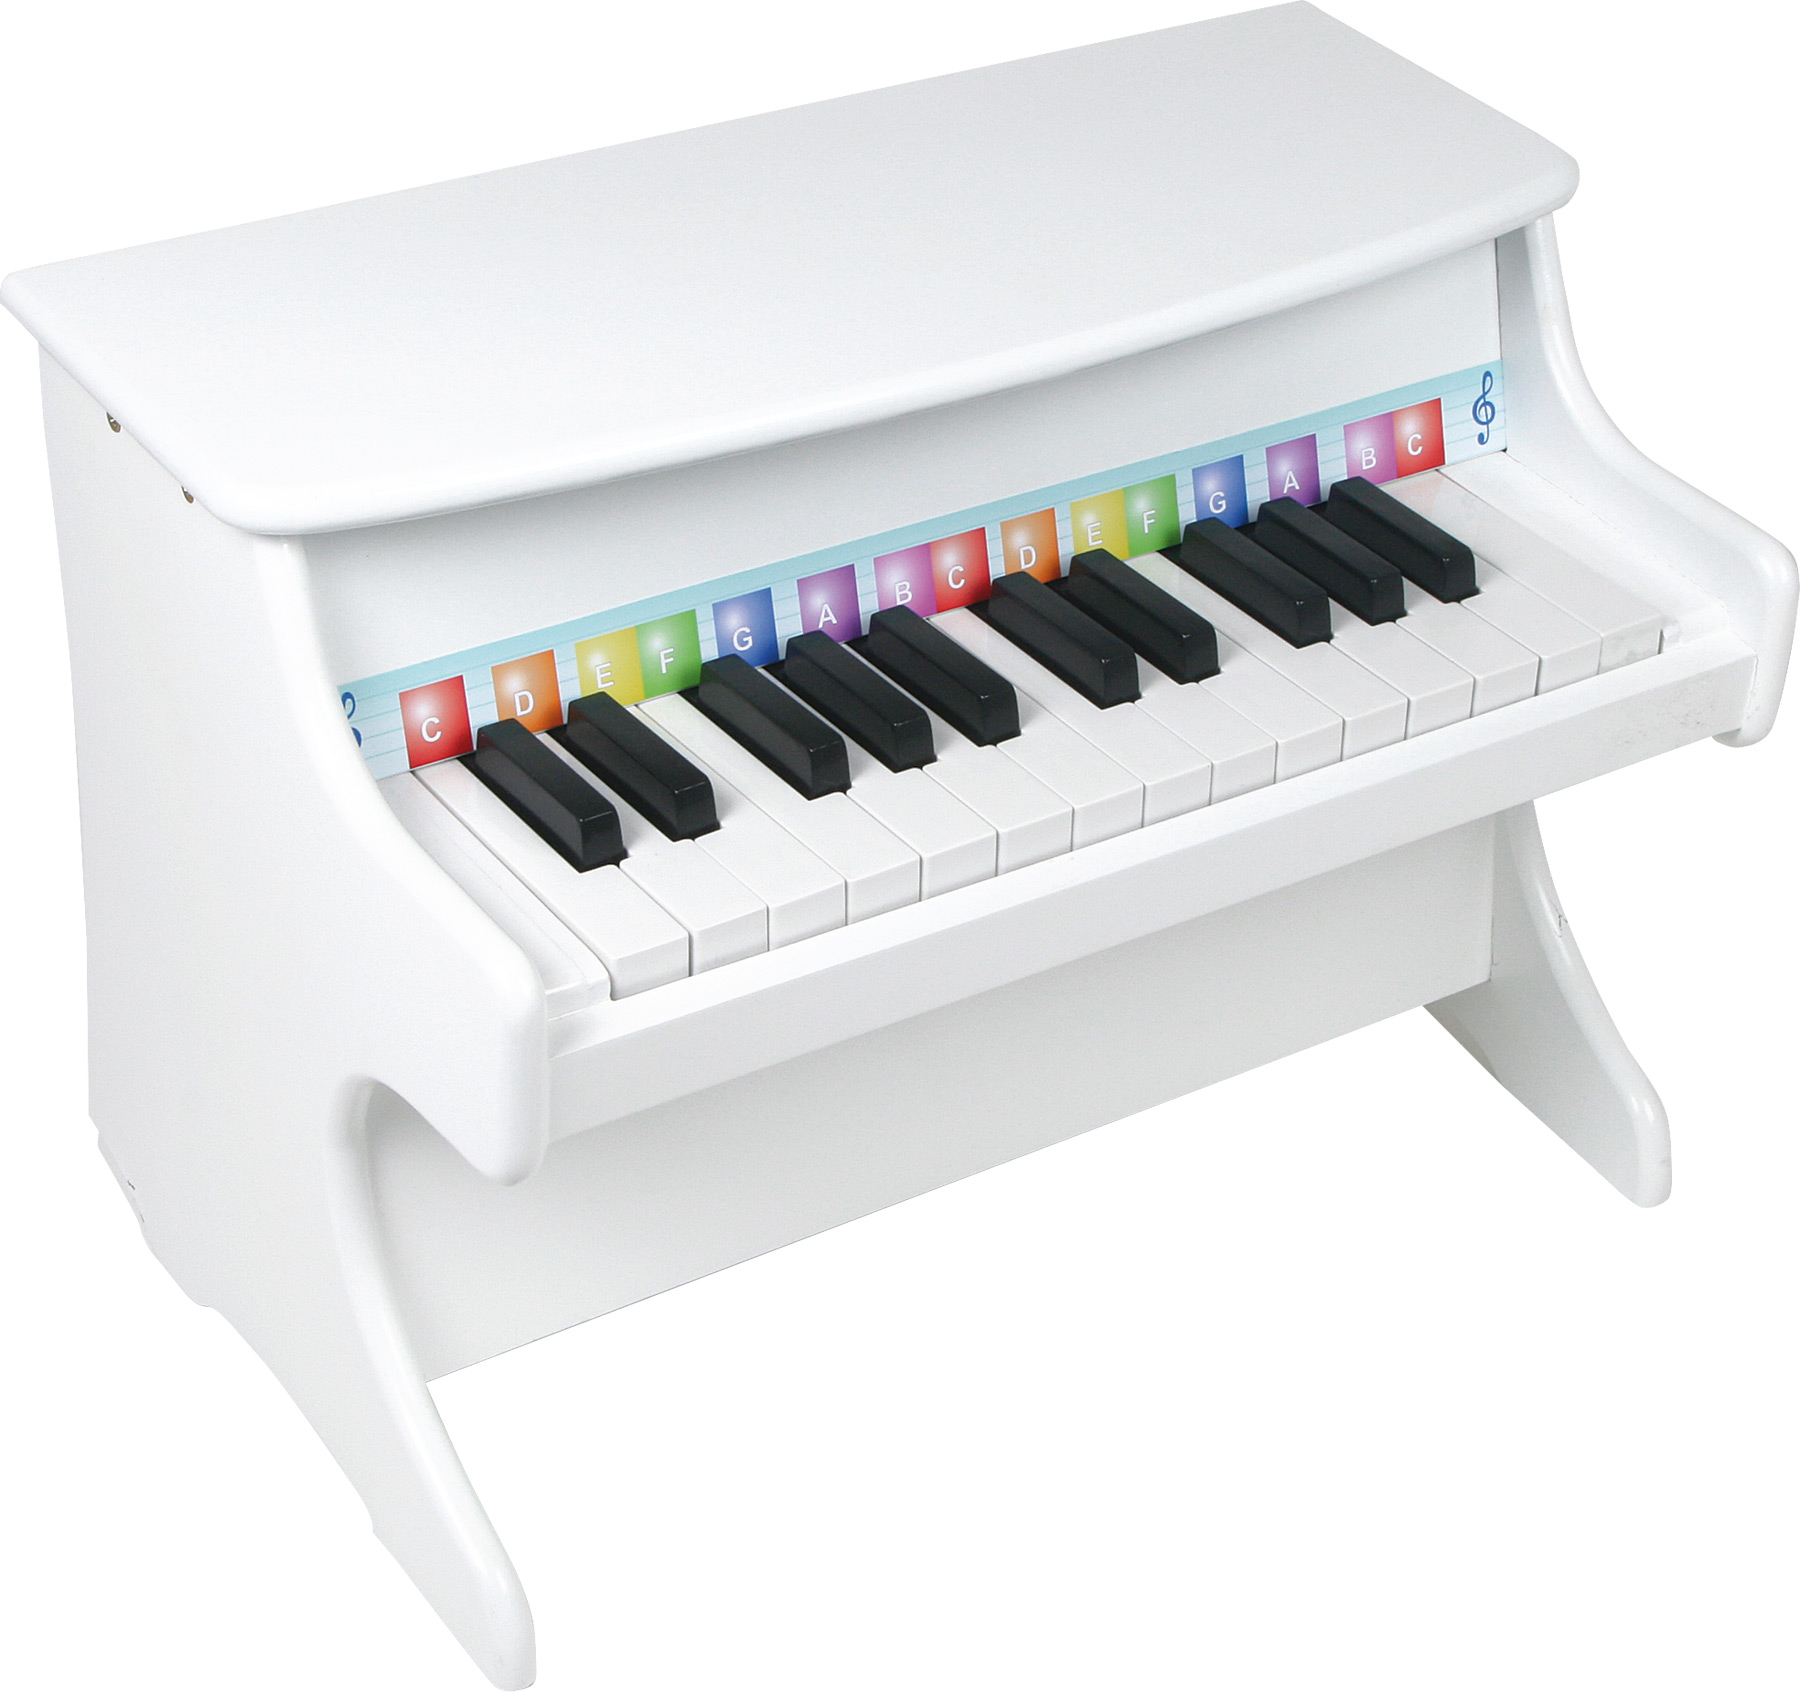 Melancholie pen sigaar small foot Large Piano, White - Music - Import for Kids ApS